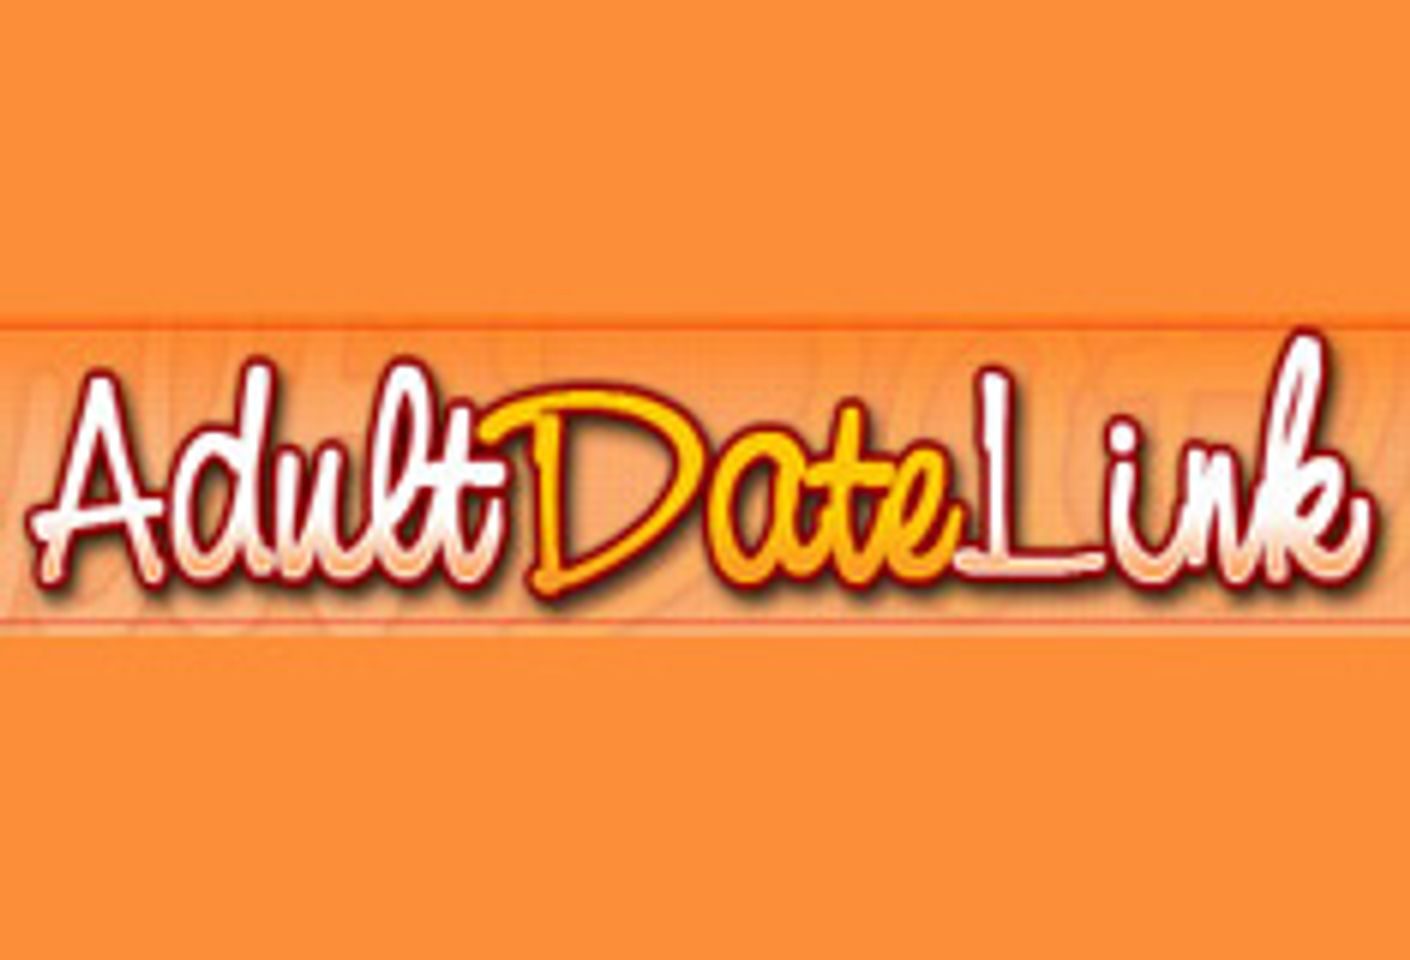 AdultDateLink Raises Payouts for Existing Affiliates and New Affiliates